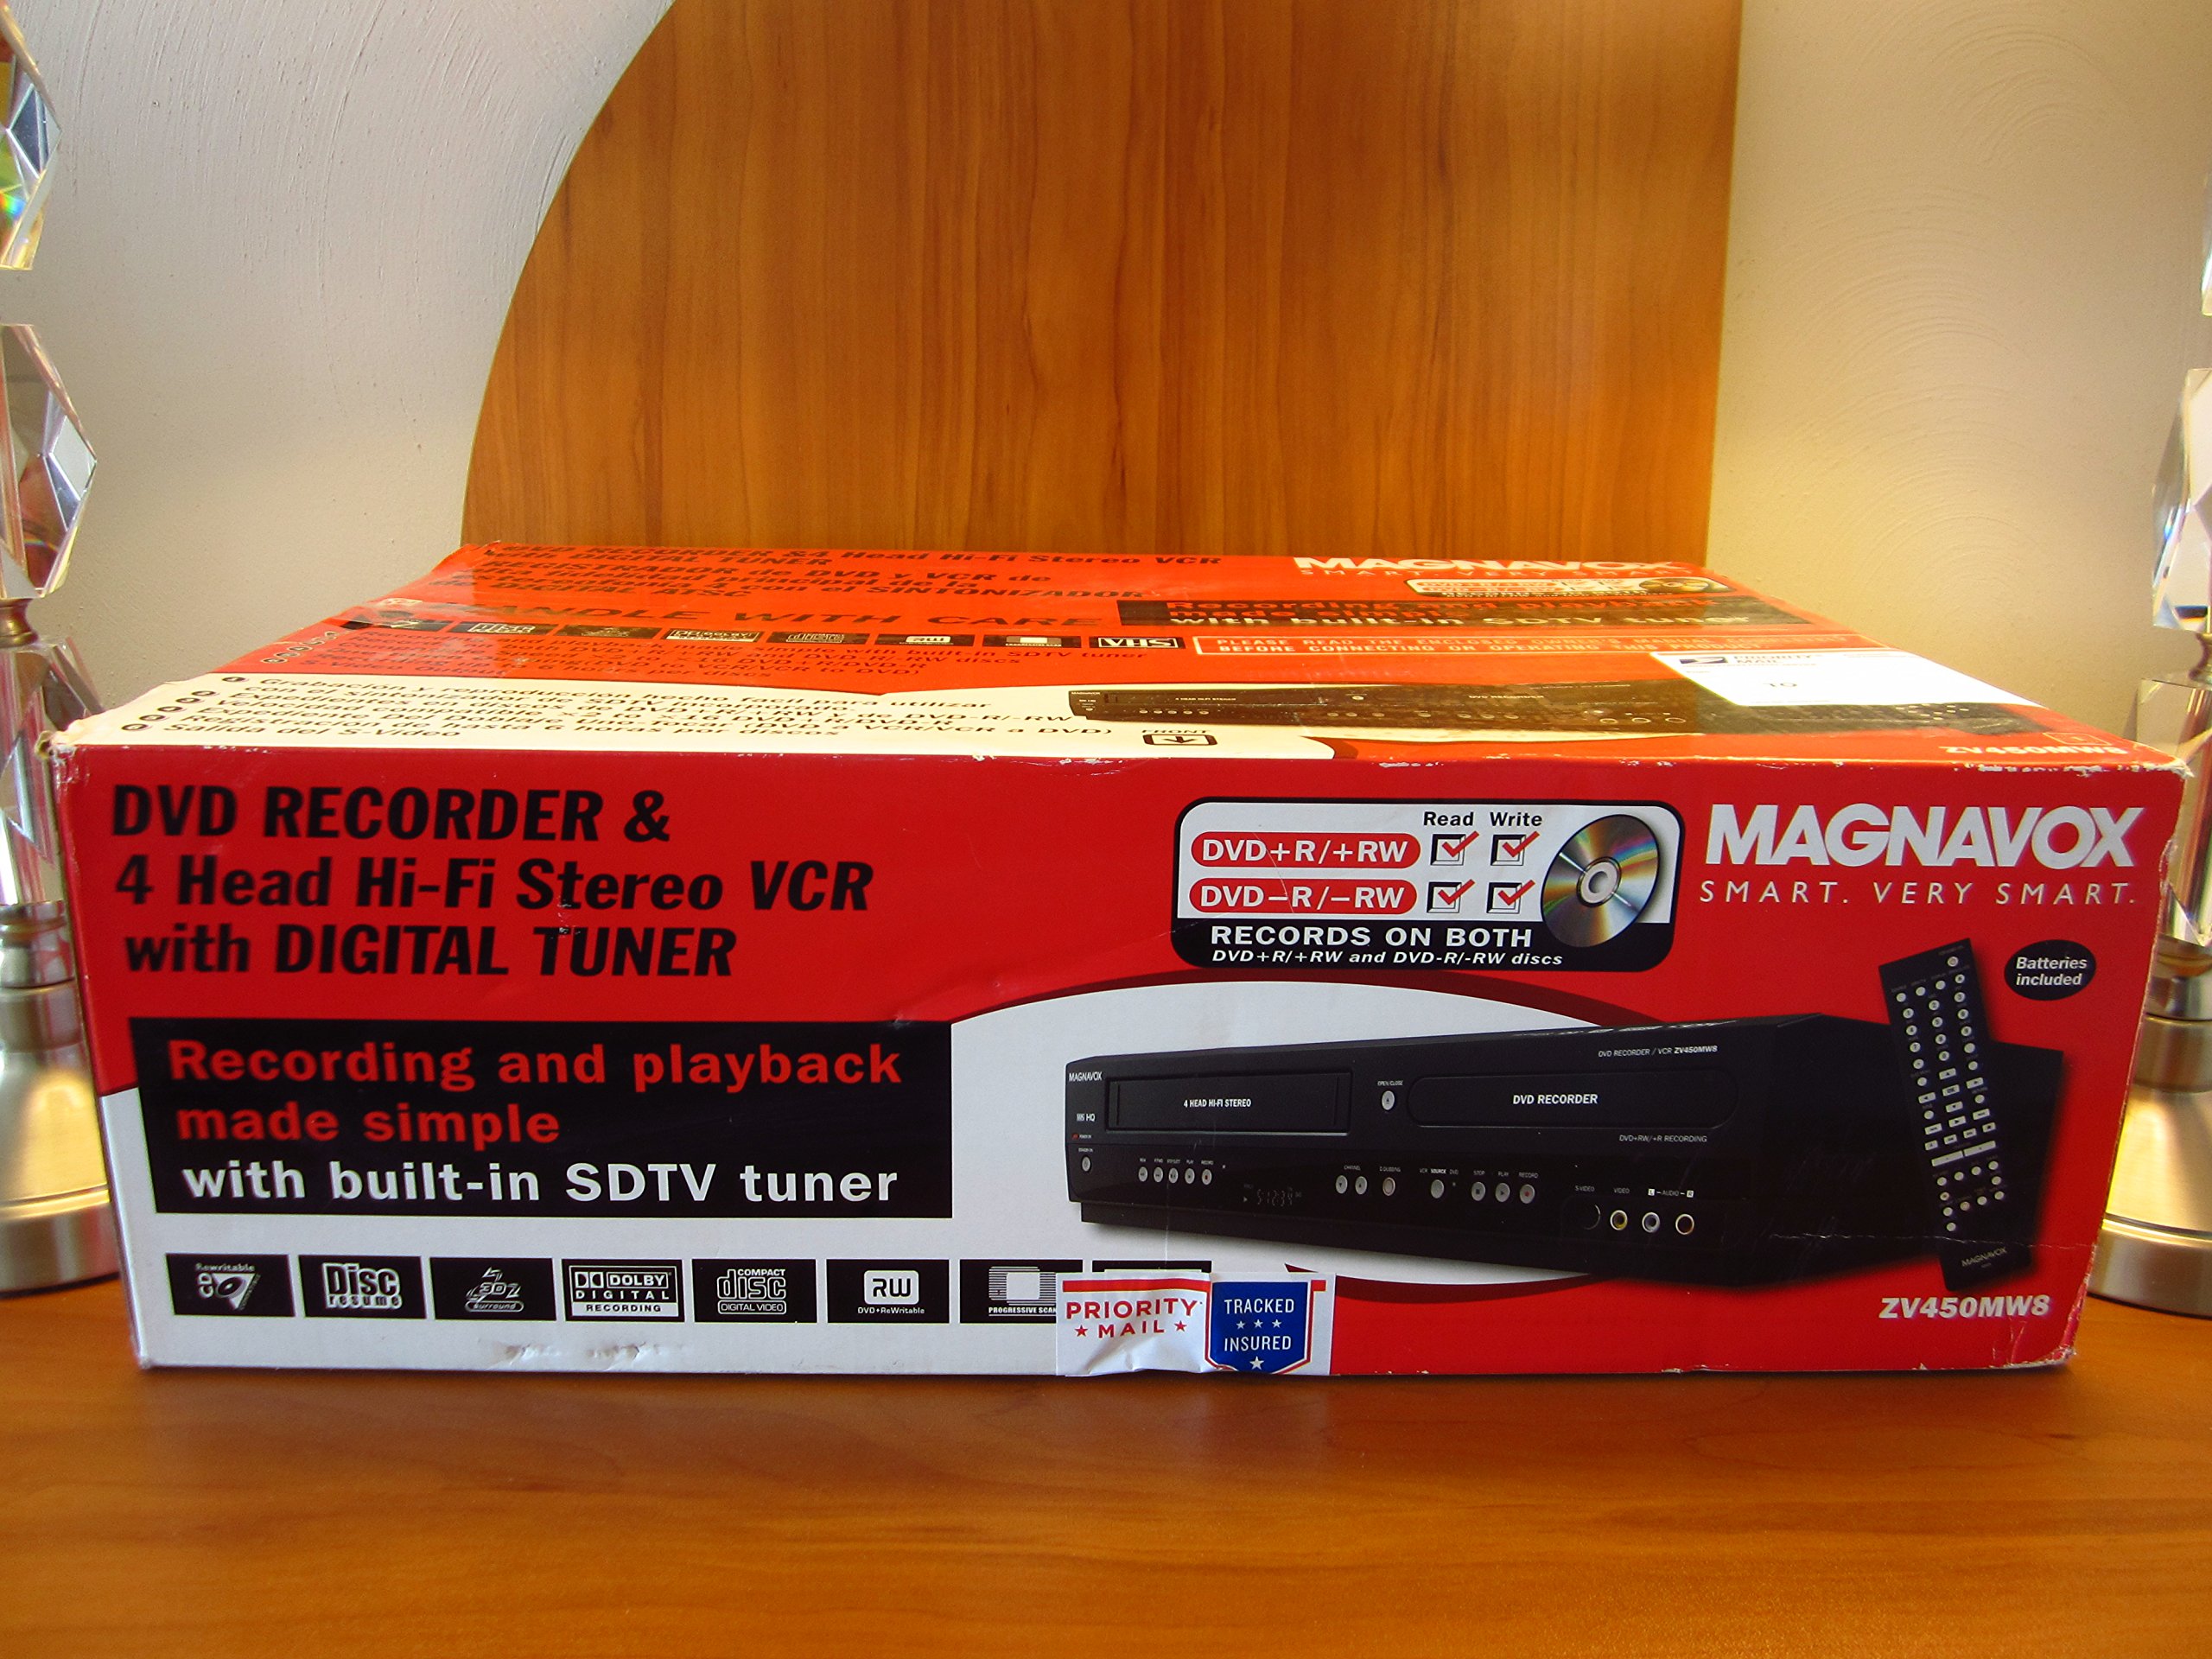 Magnavox ZV450MW8 DVD Recorder and VCR Combo with Digital Tuner [Electronics]